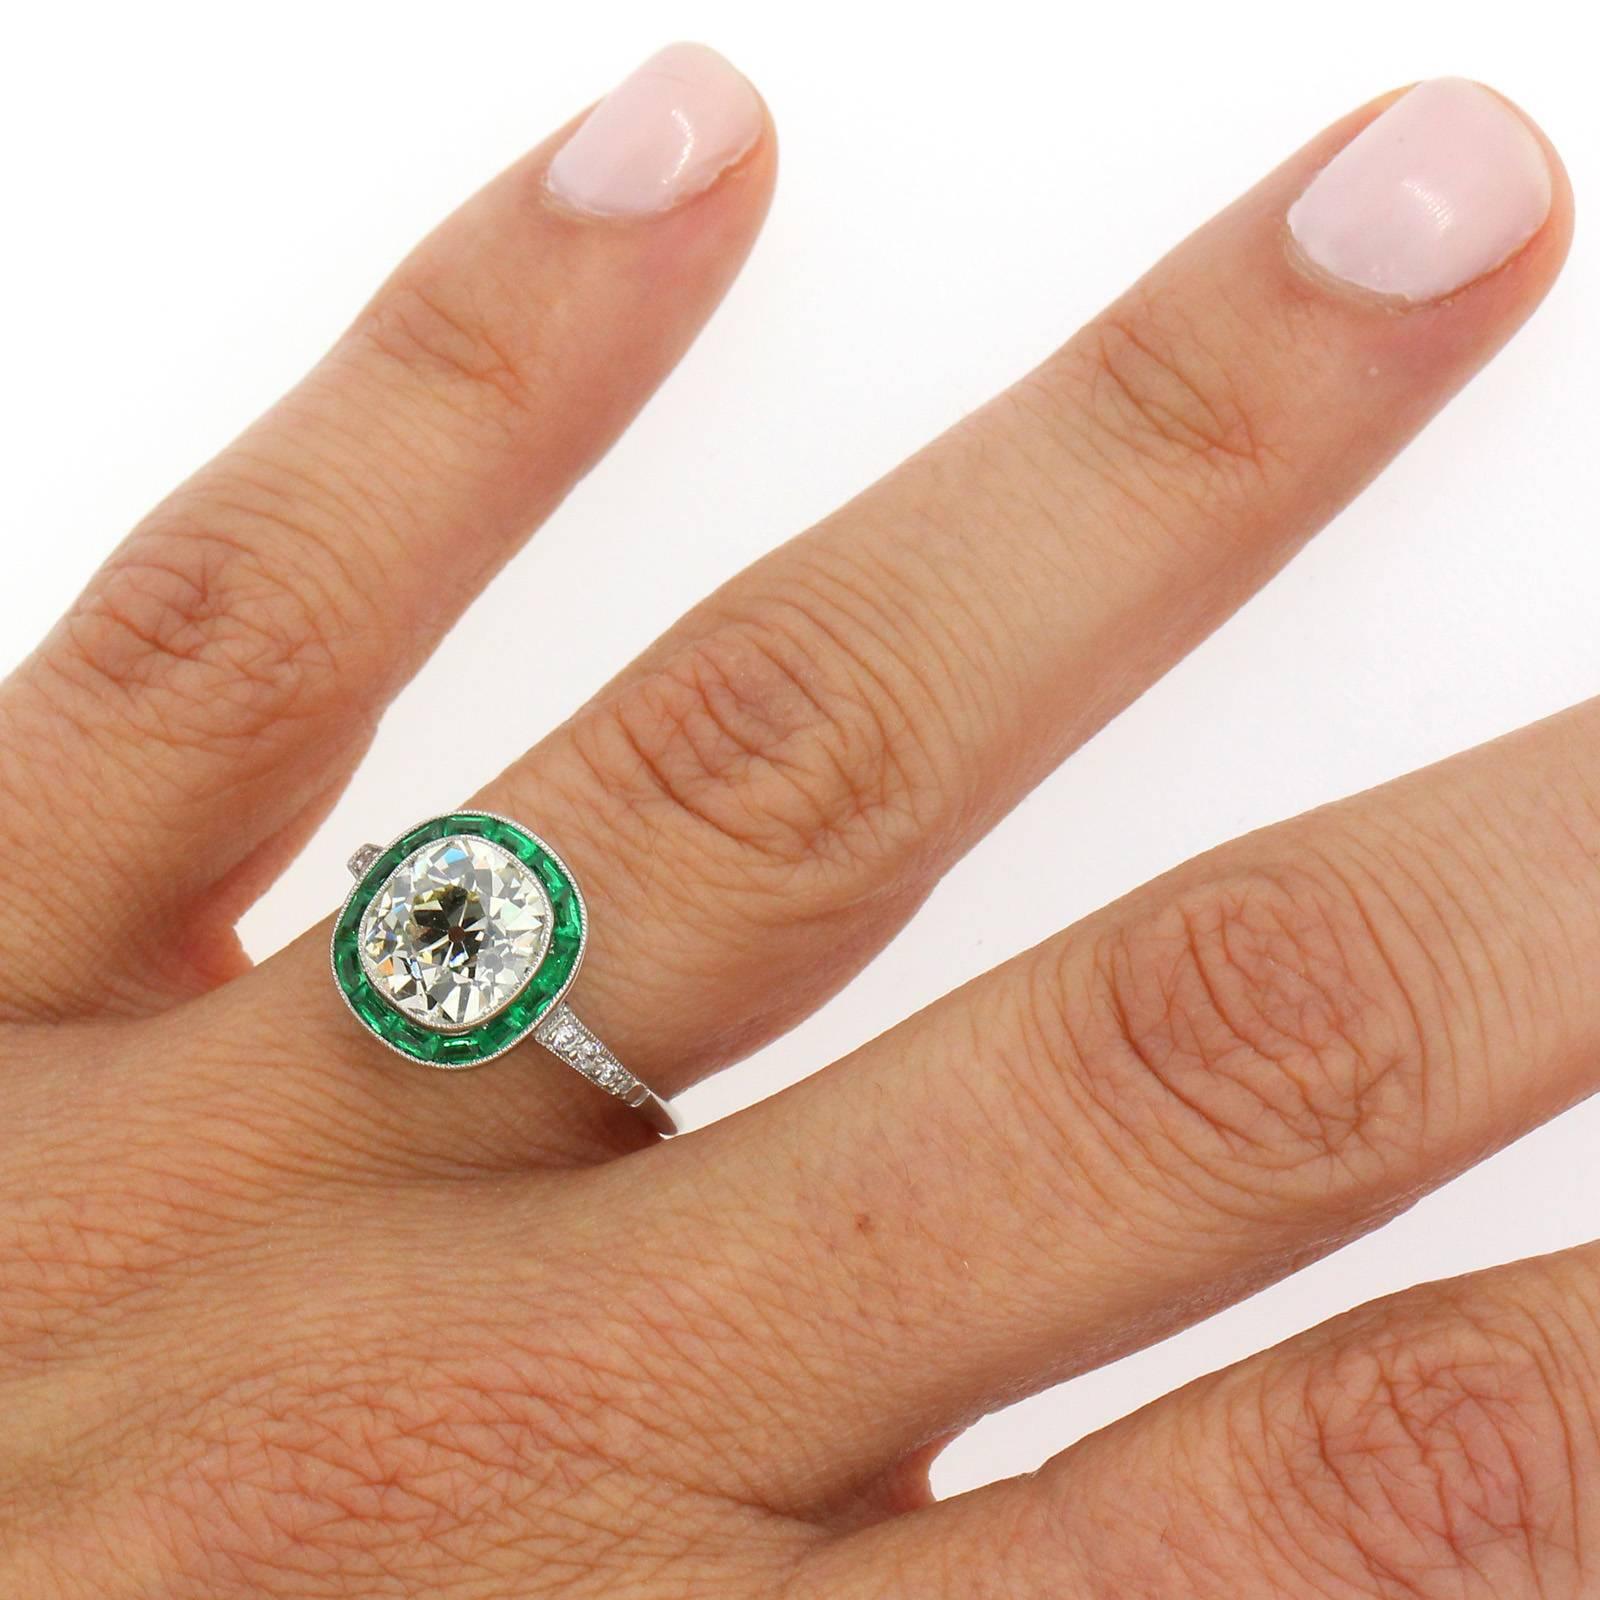 A refined recreation of a style gone by, this beautiful ring features a two and half carats Old Cushion Cut Diamond of warm color and high clarity.  The stunning diamond is surrounded by calibrated deep green Emeralds, and six Old European Cut